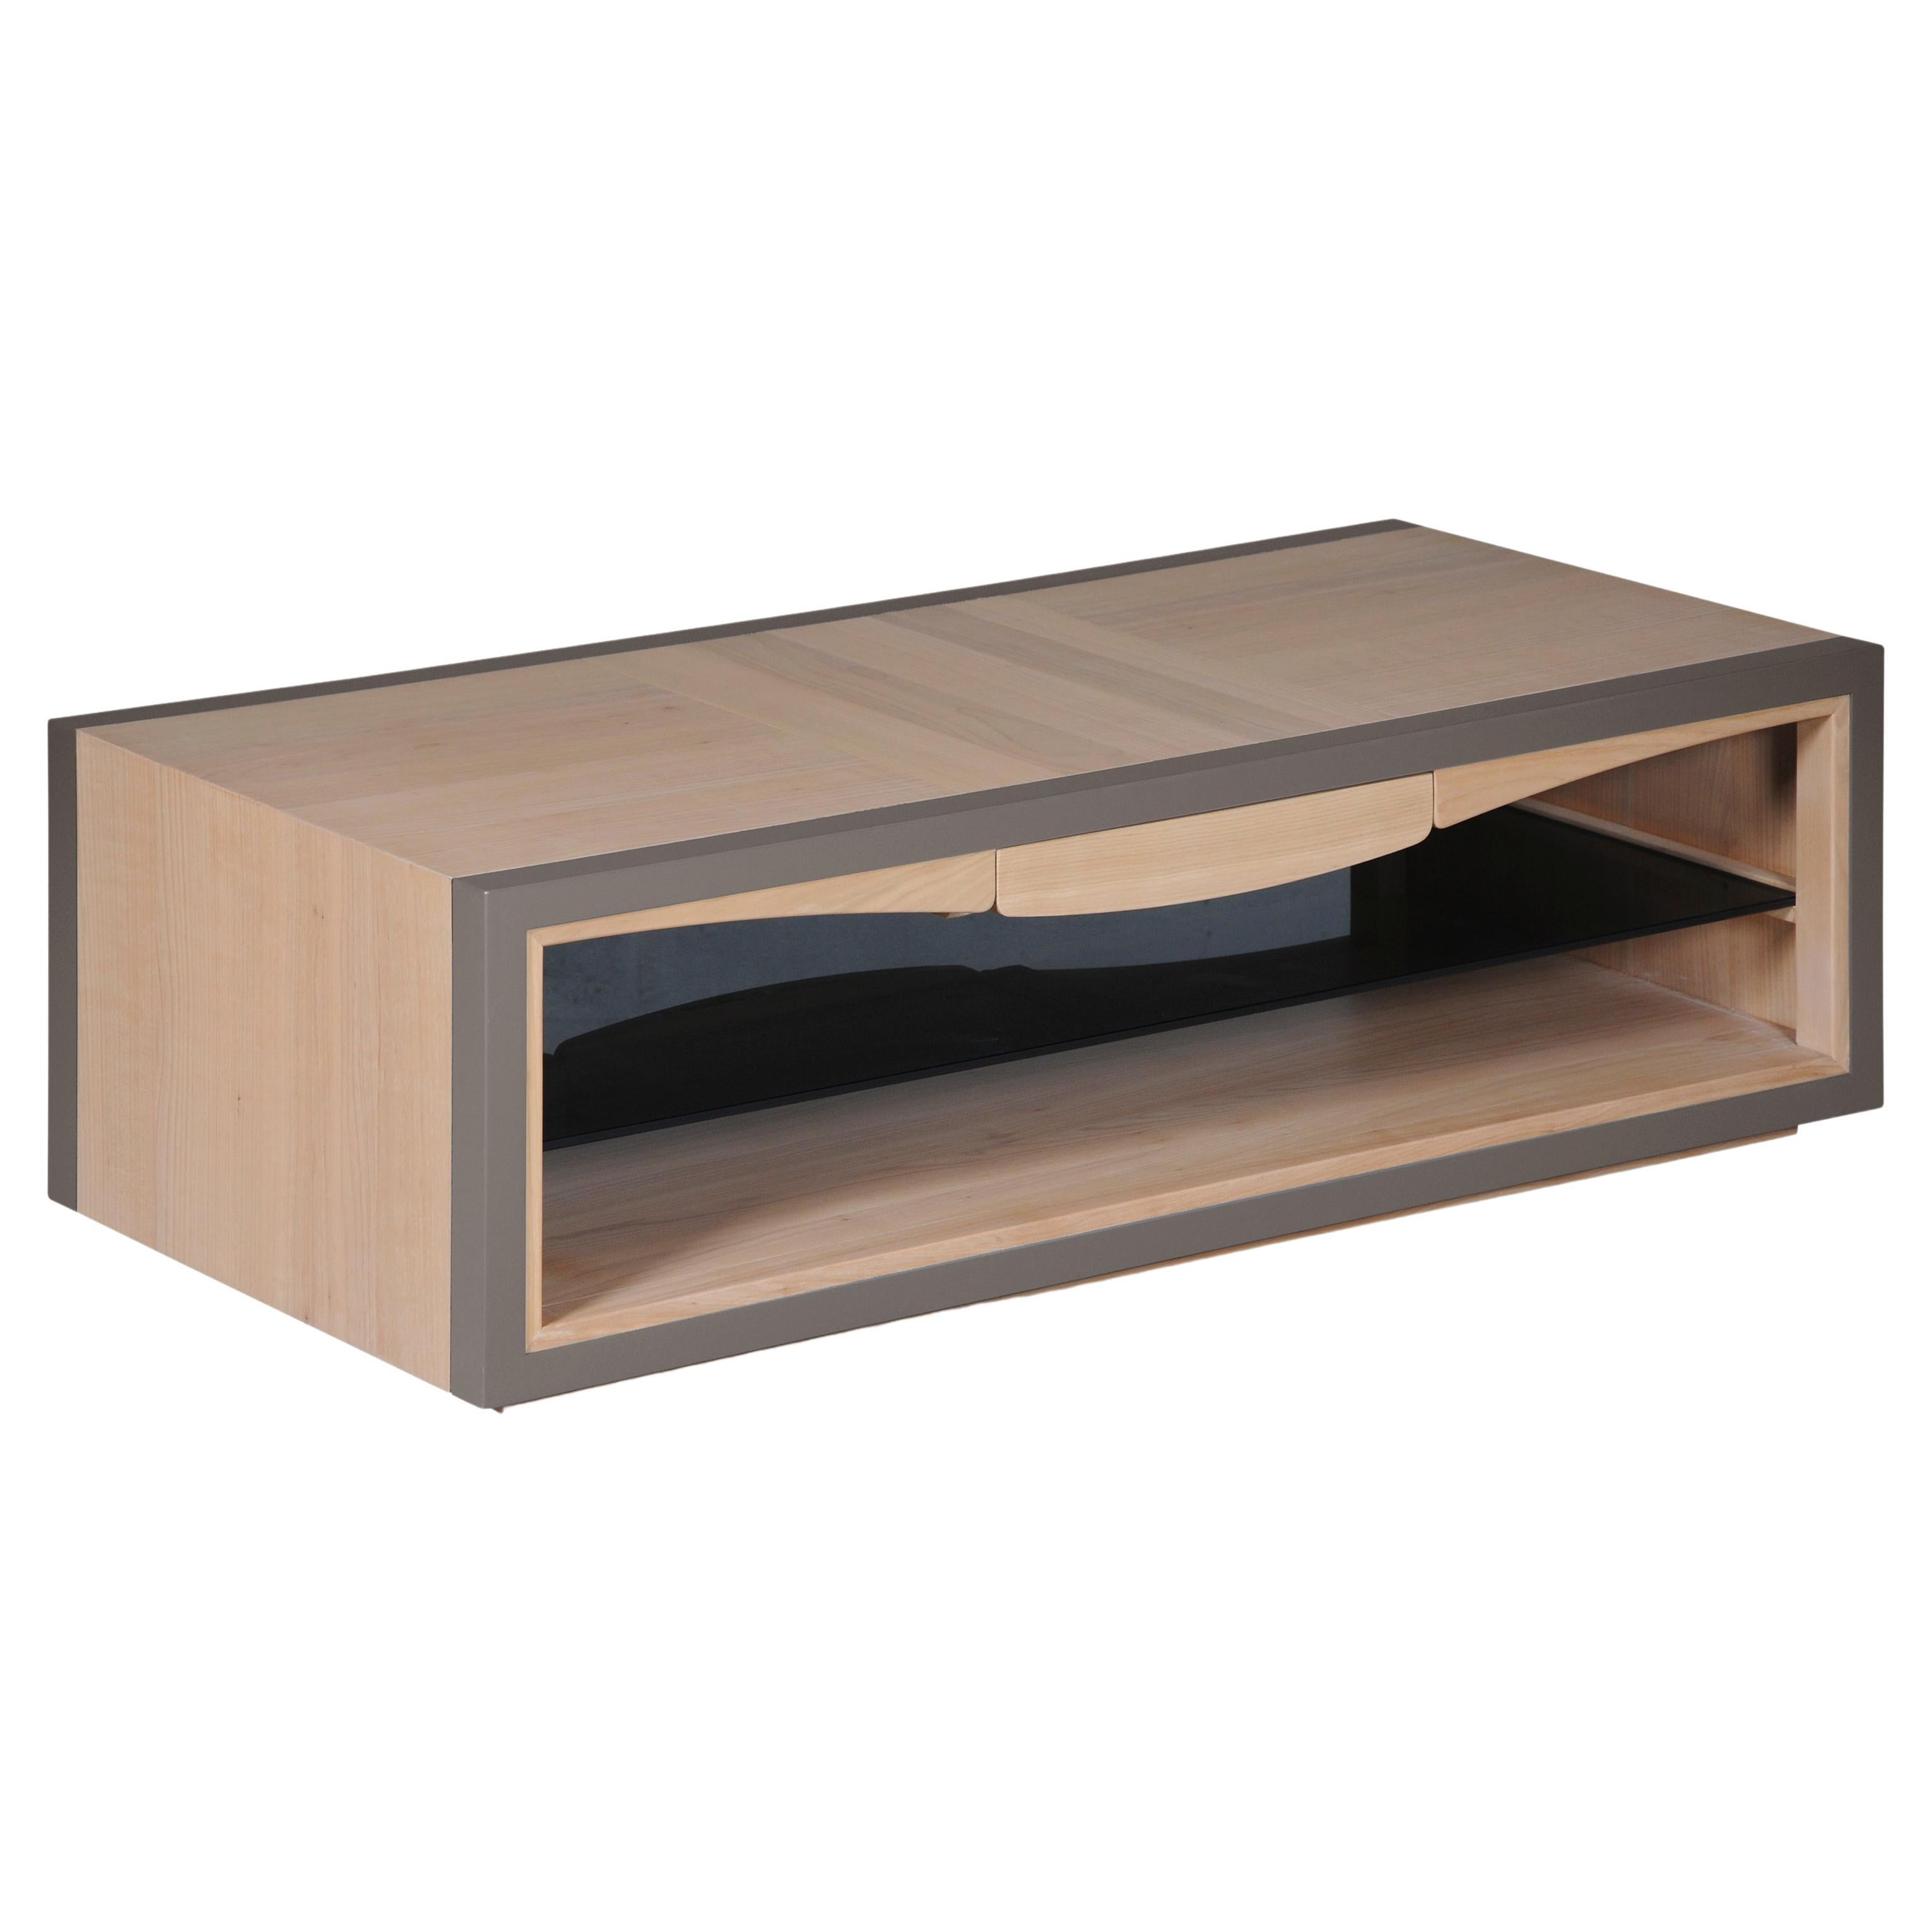 1-drawer French coffee table in cherry wood , design by Christophe Lecomte  For Sale